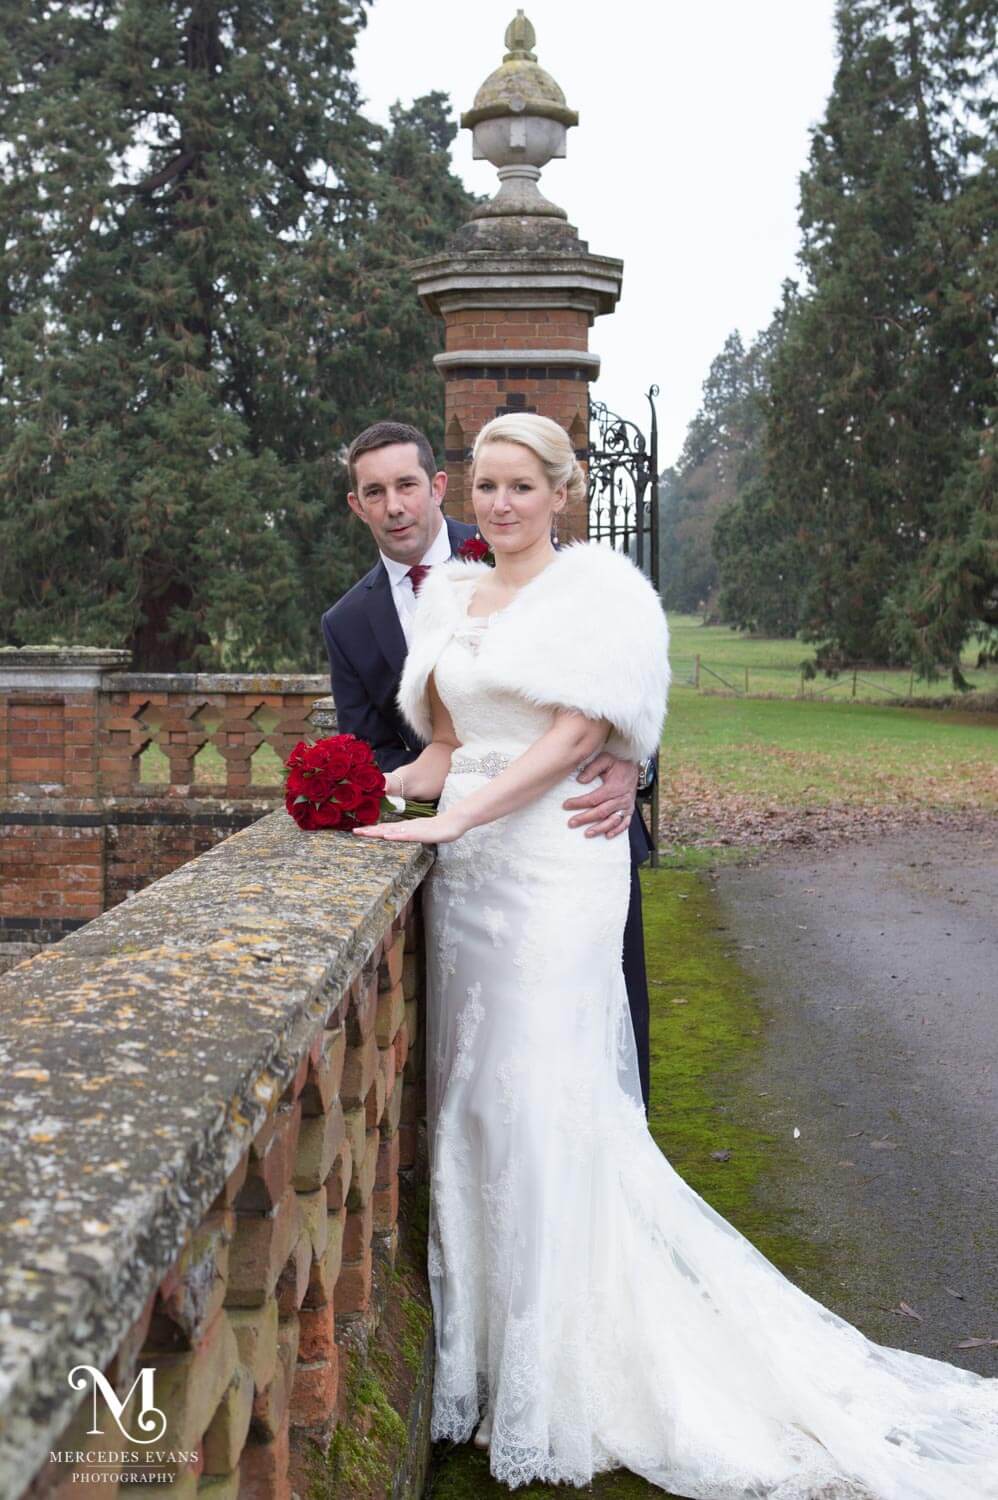 the newly weds lean together against the bridge railings